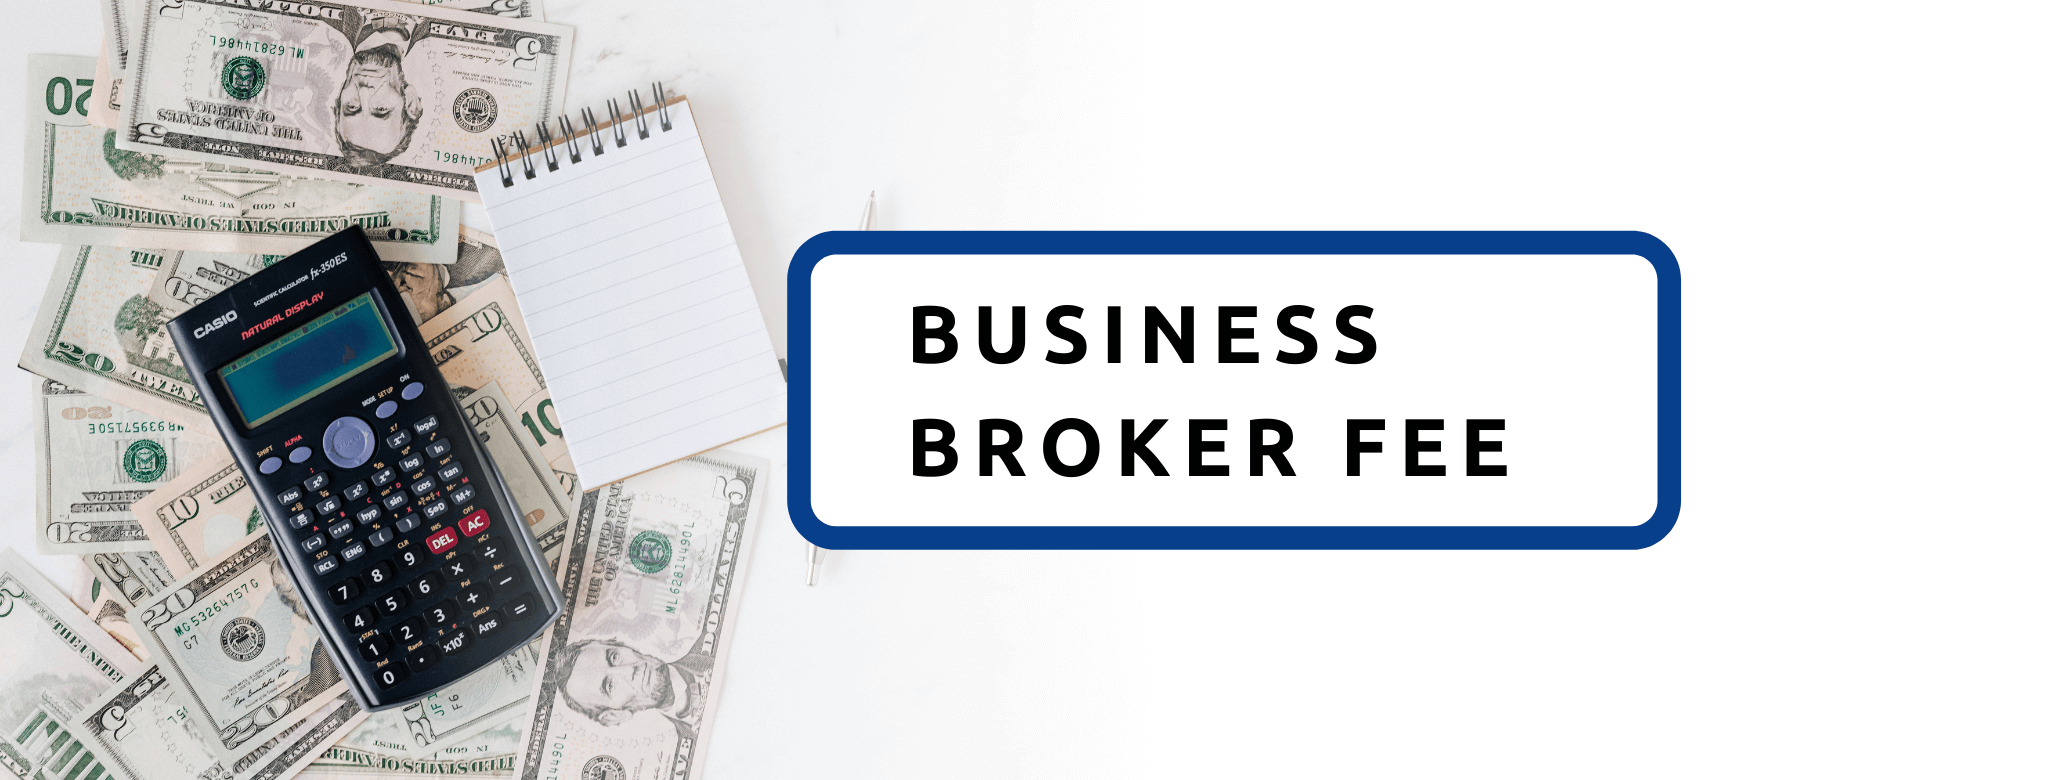 what is a business broker fee?